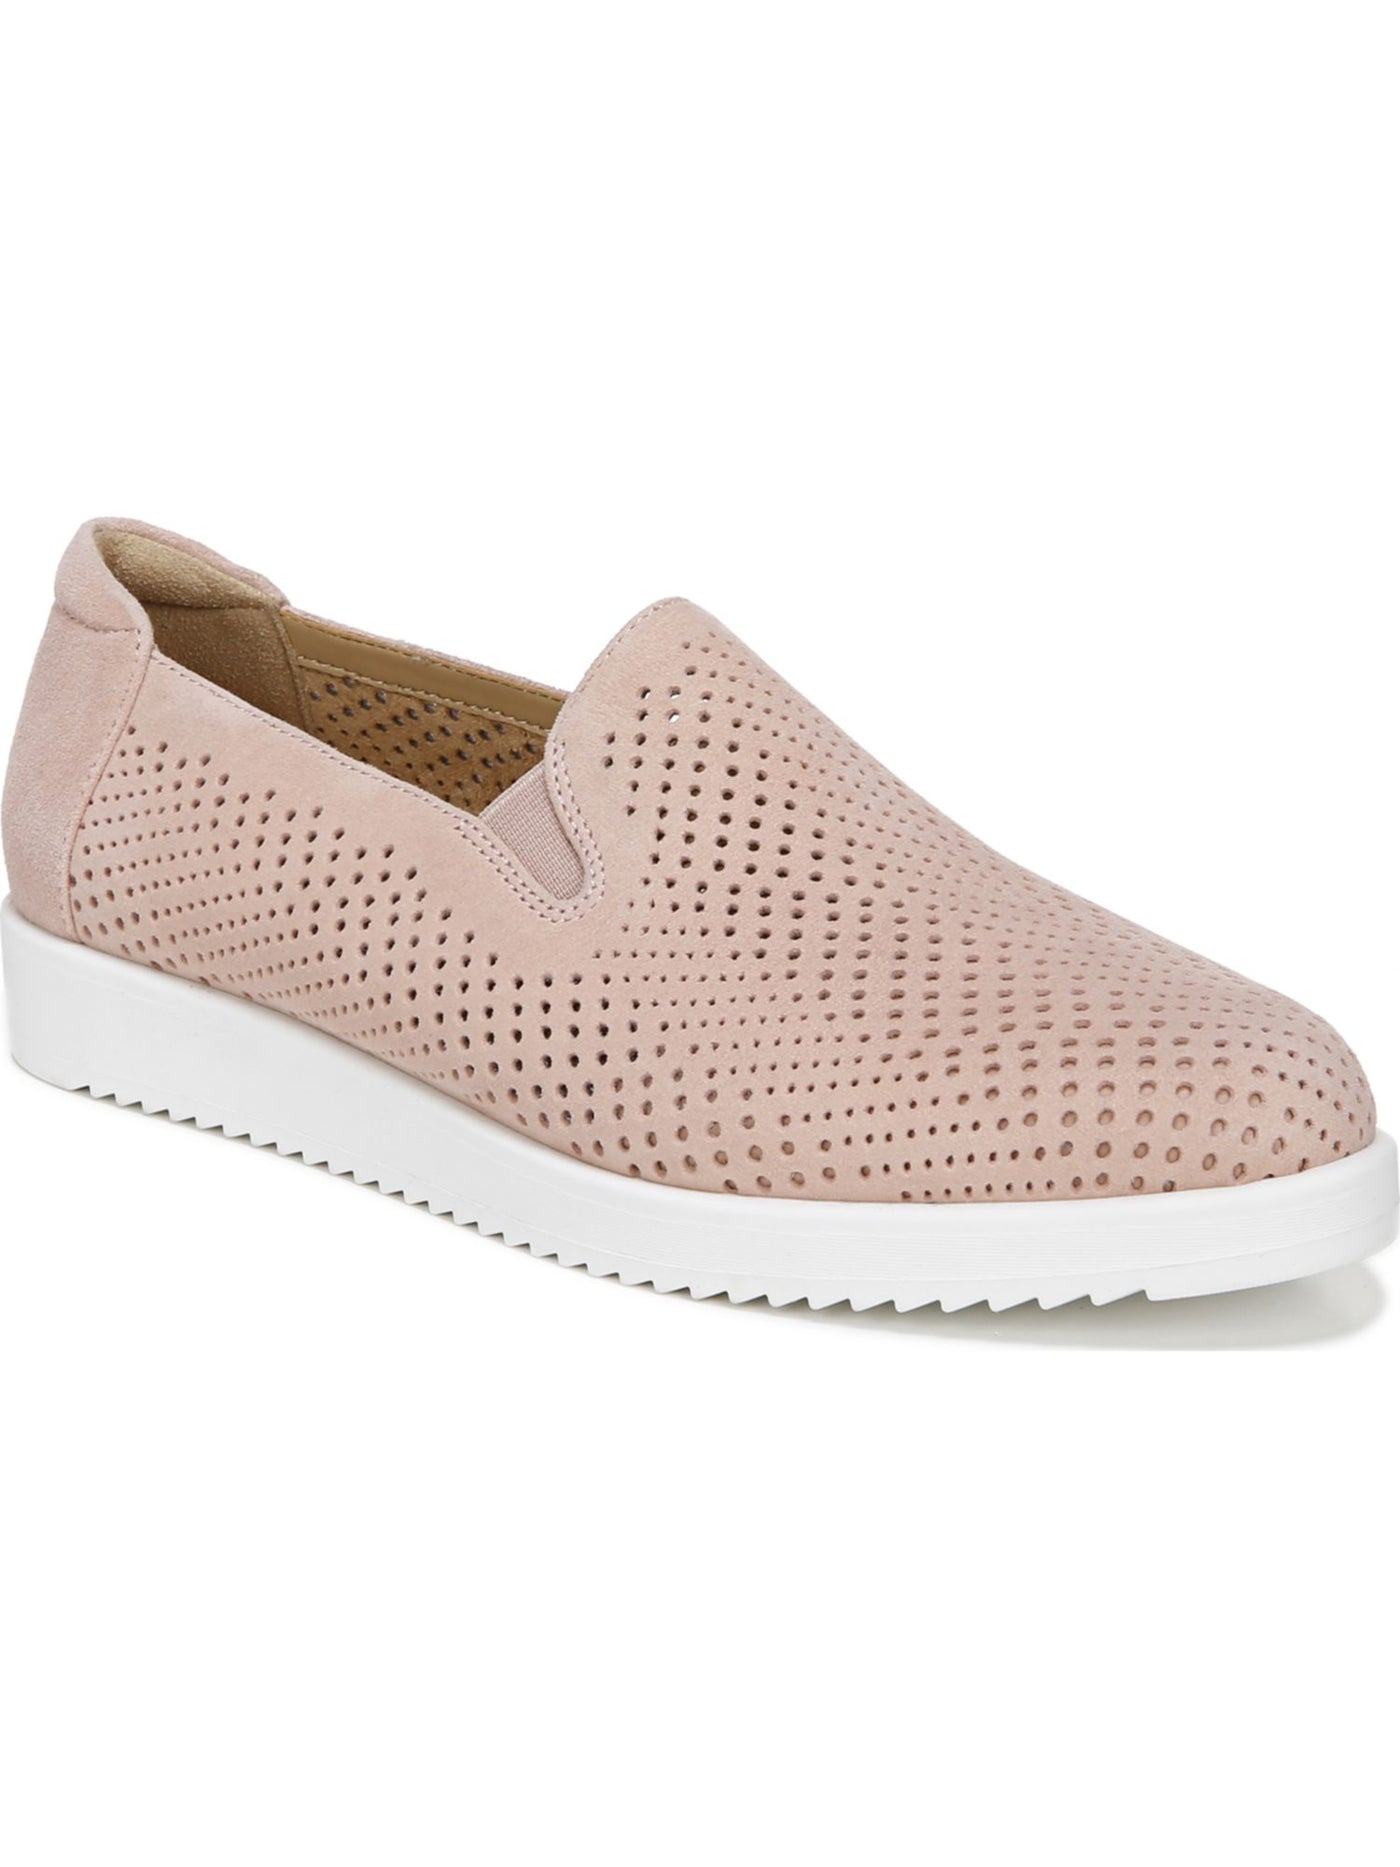 NATURALIZER Womens Pink 1/2" Platform Elastic Goring Perforated Breathable Bonnie Round Toe Wedge Slip On Leather Athletic Sneakers Shoes 8 M